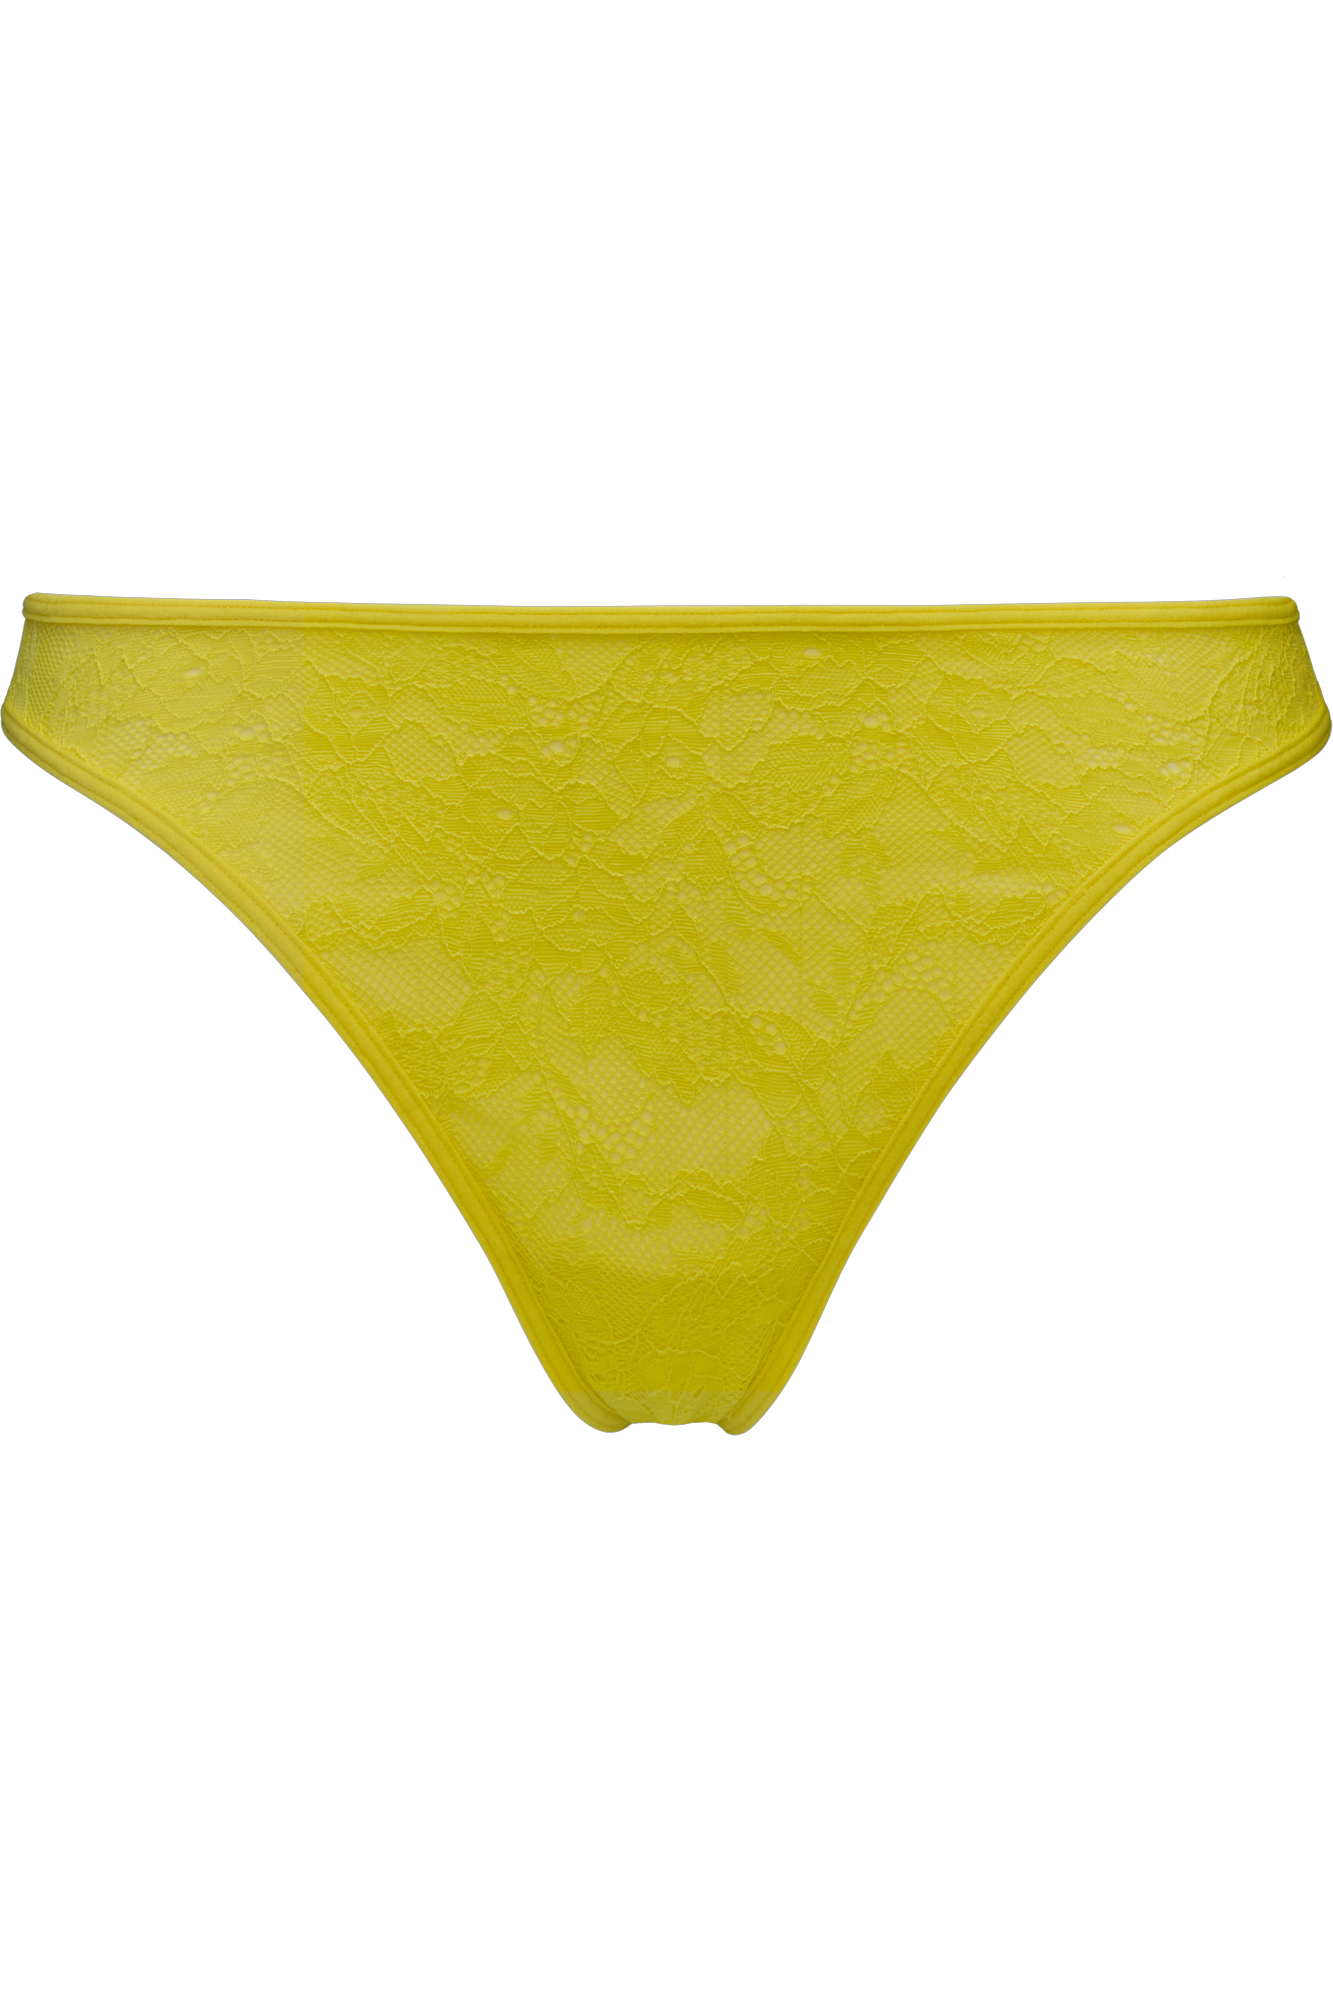 Marlies Dekkers space odyssey 4 cm string citrus yellow lace